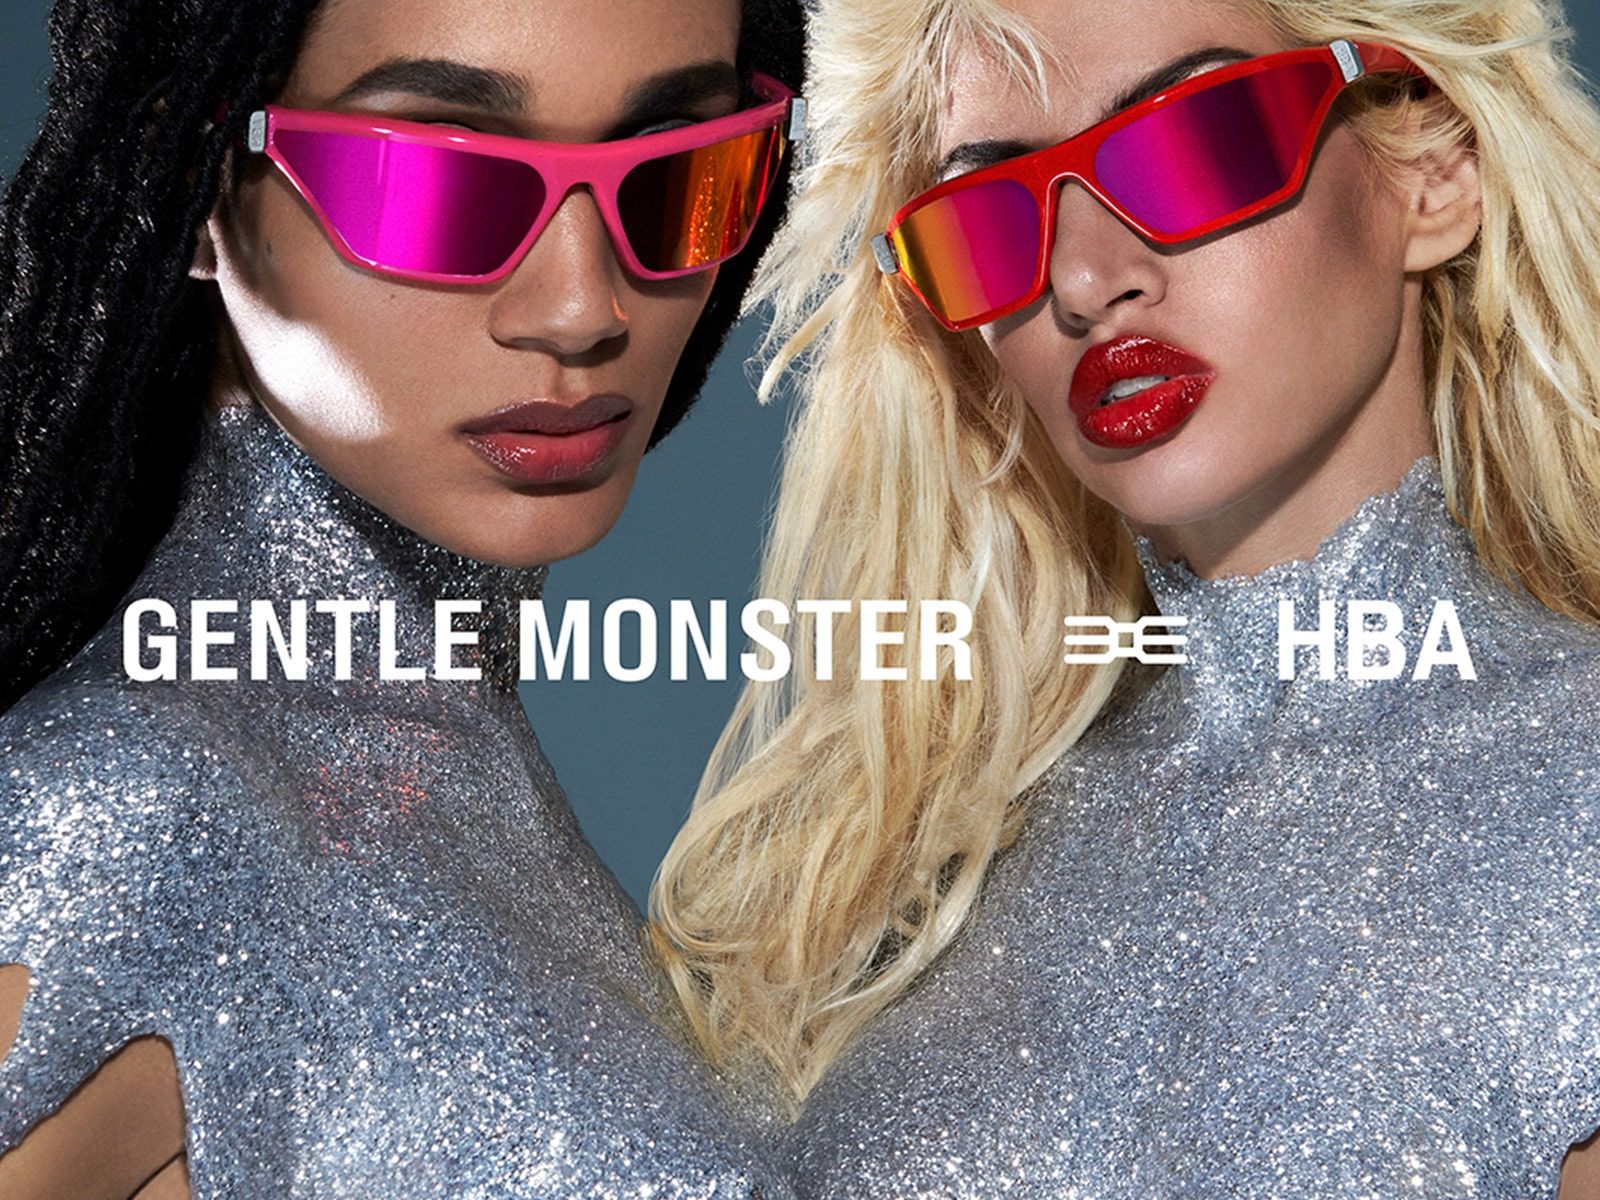 Hood by Air & Gentle Monster present a fast and furious collaboration